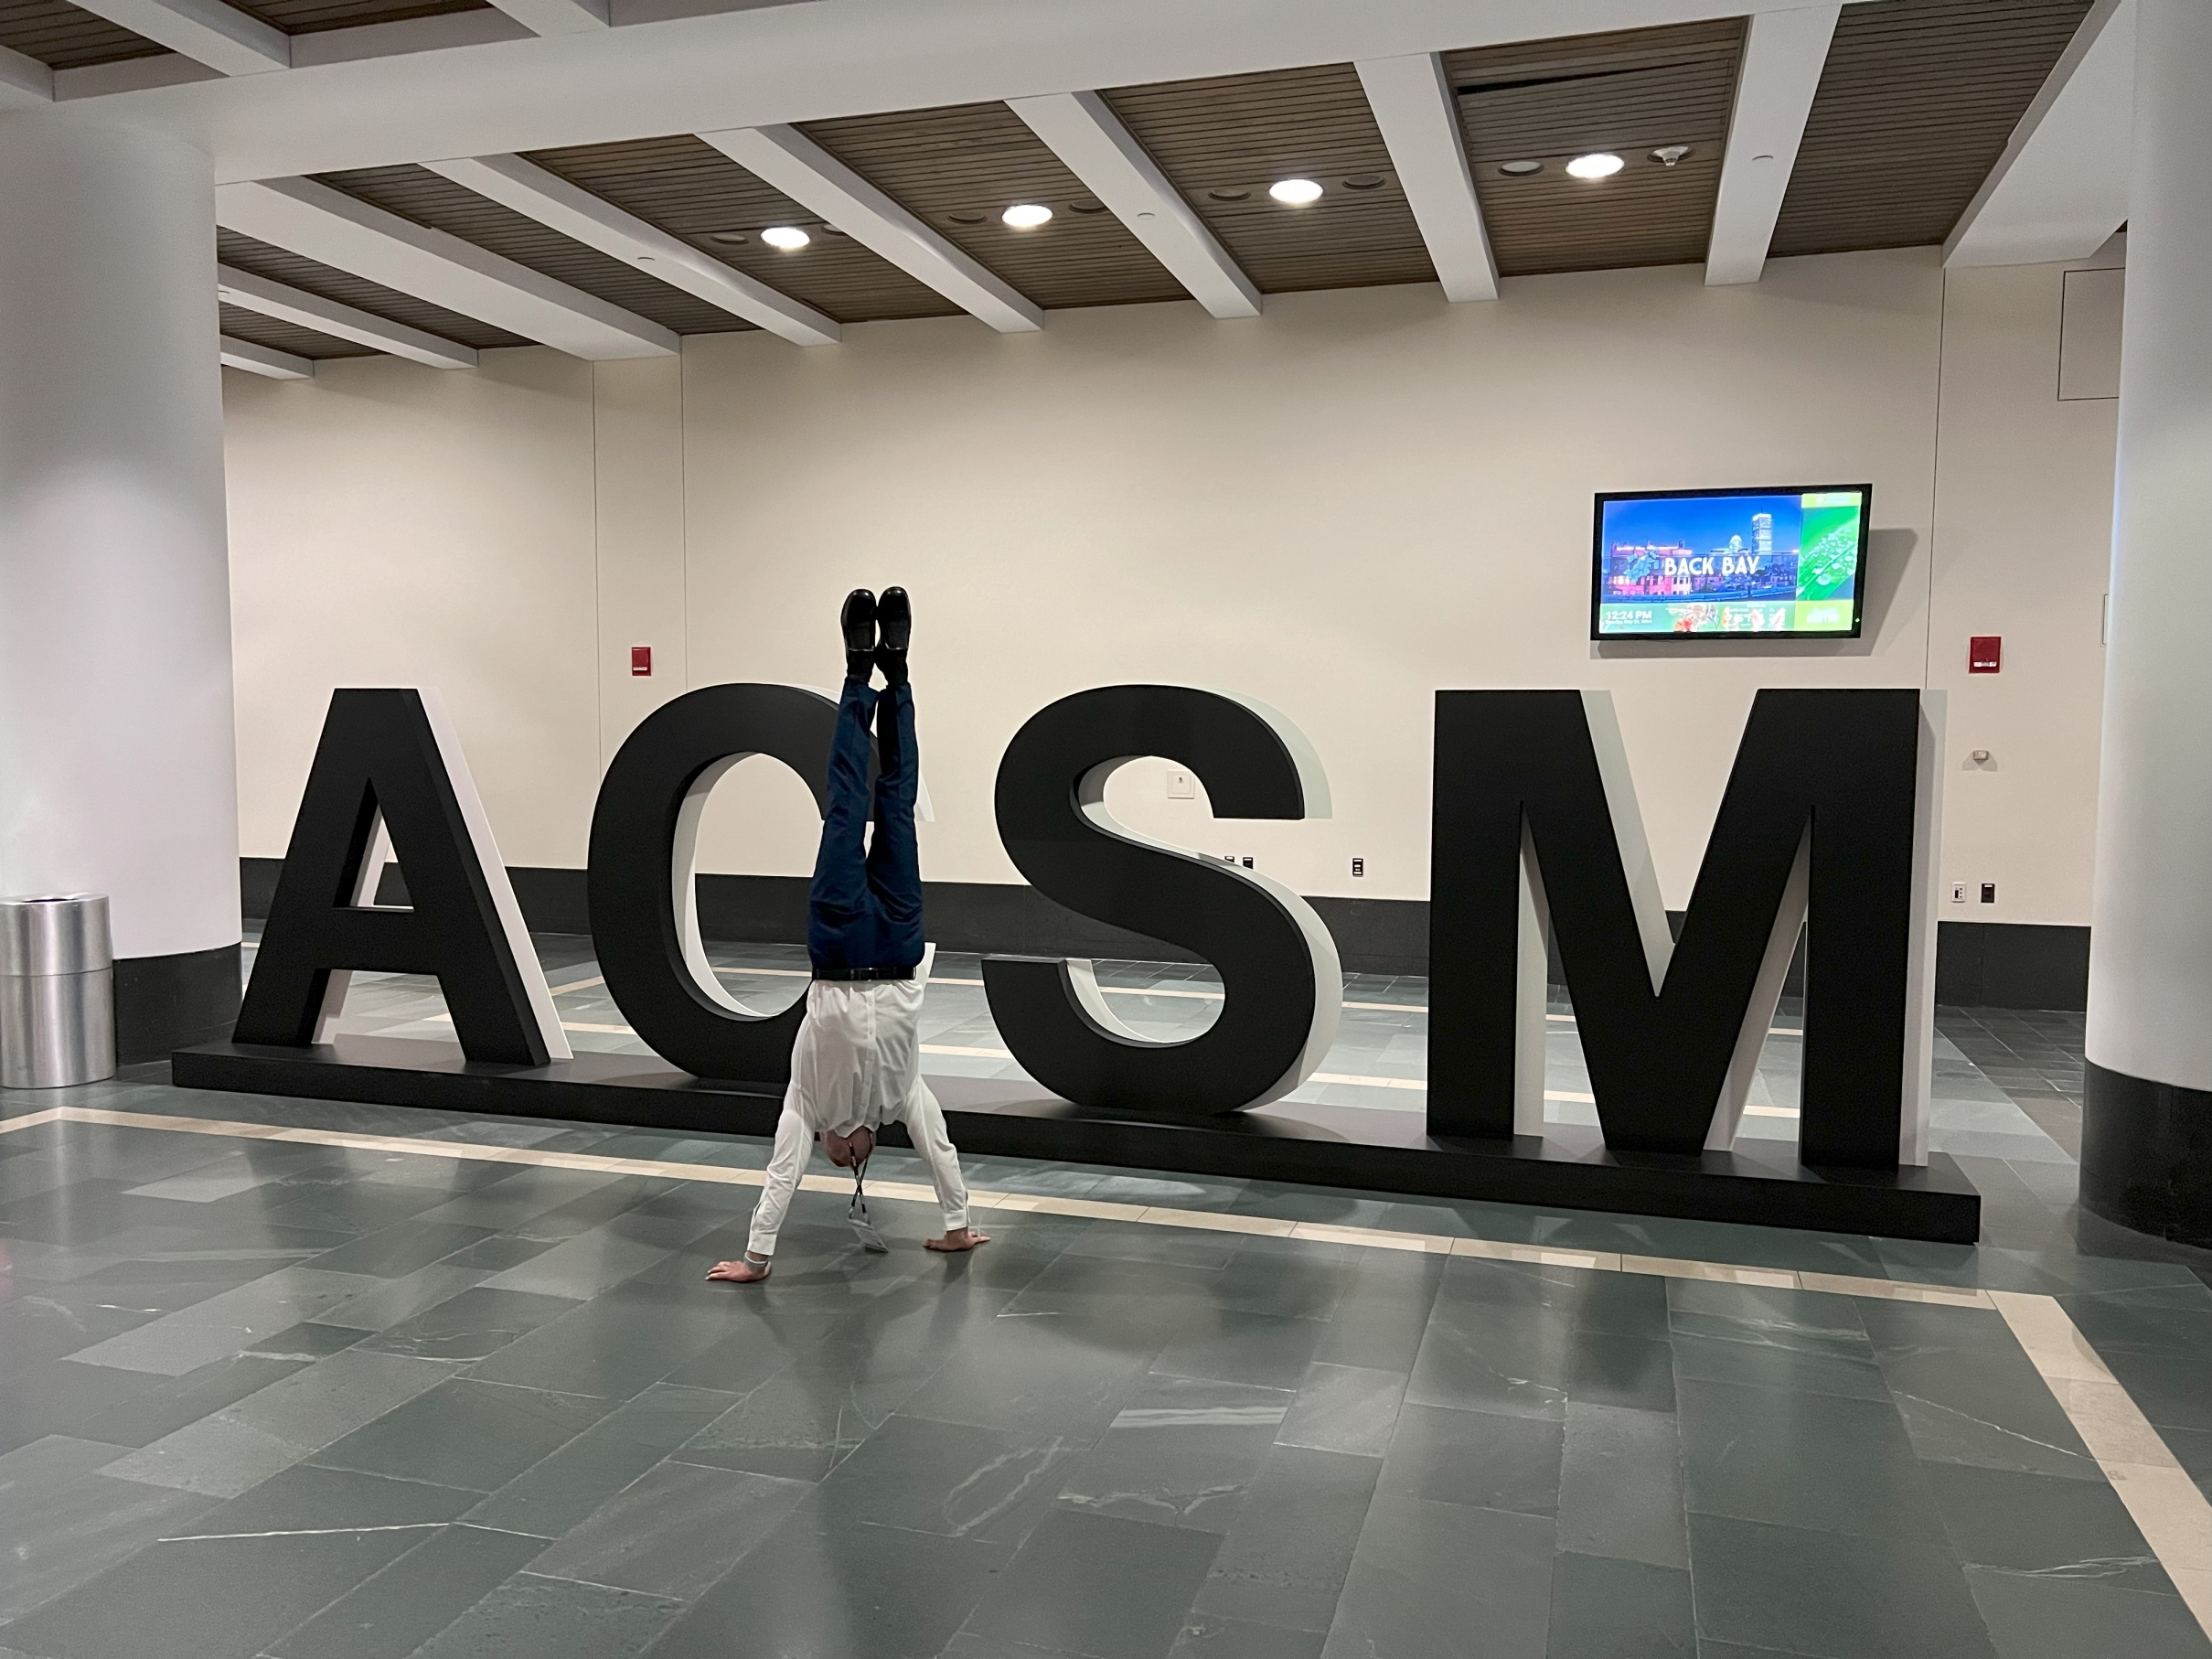 Handstand at the 71st Annual Meeting of the ACSM in Boston USA